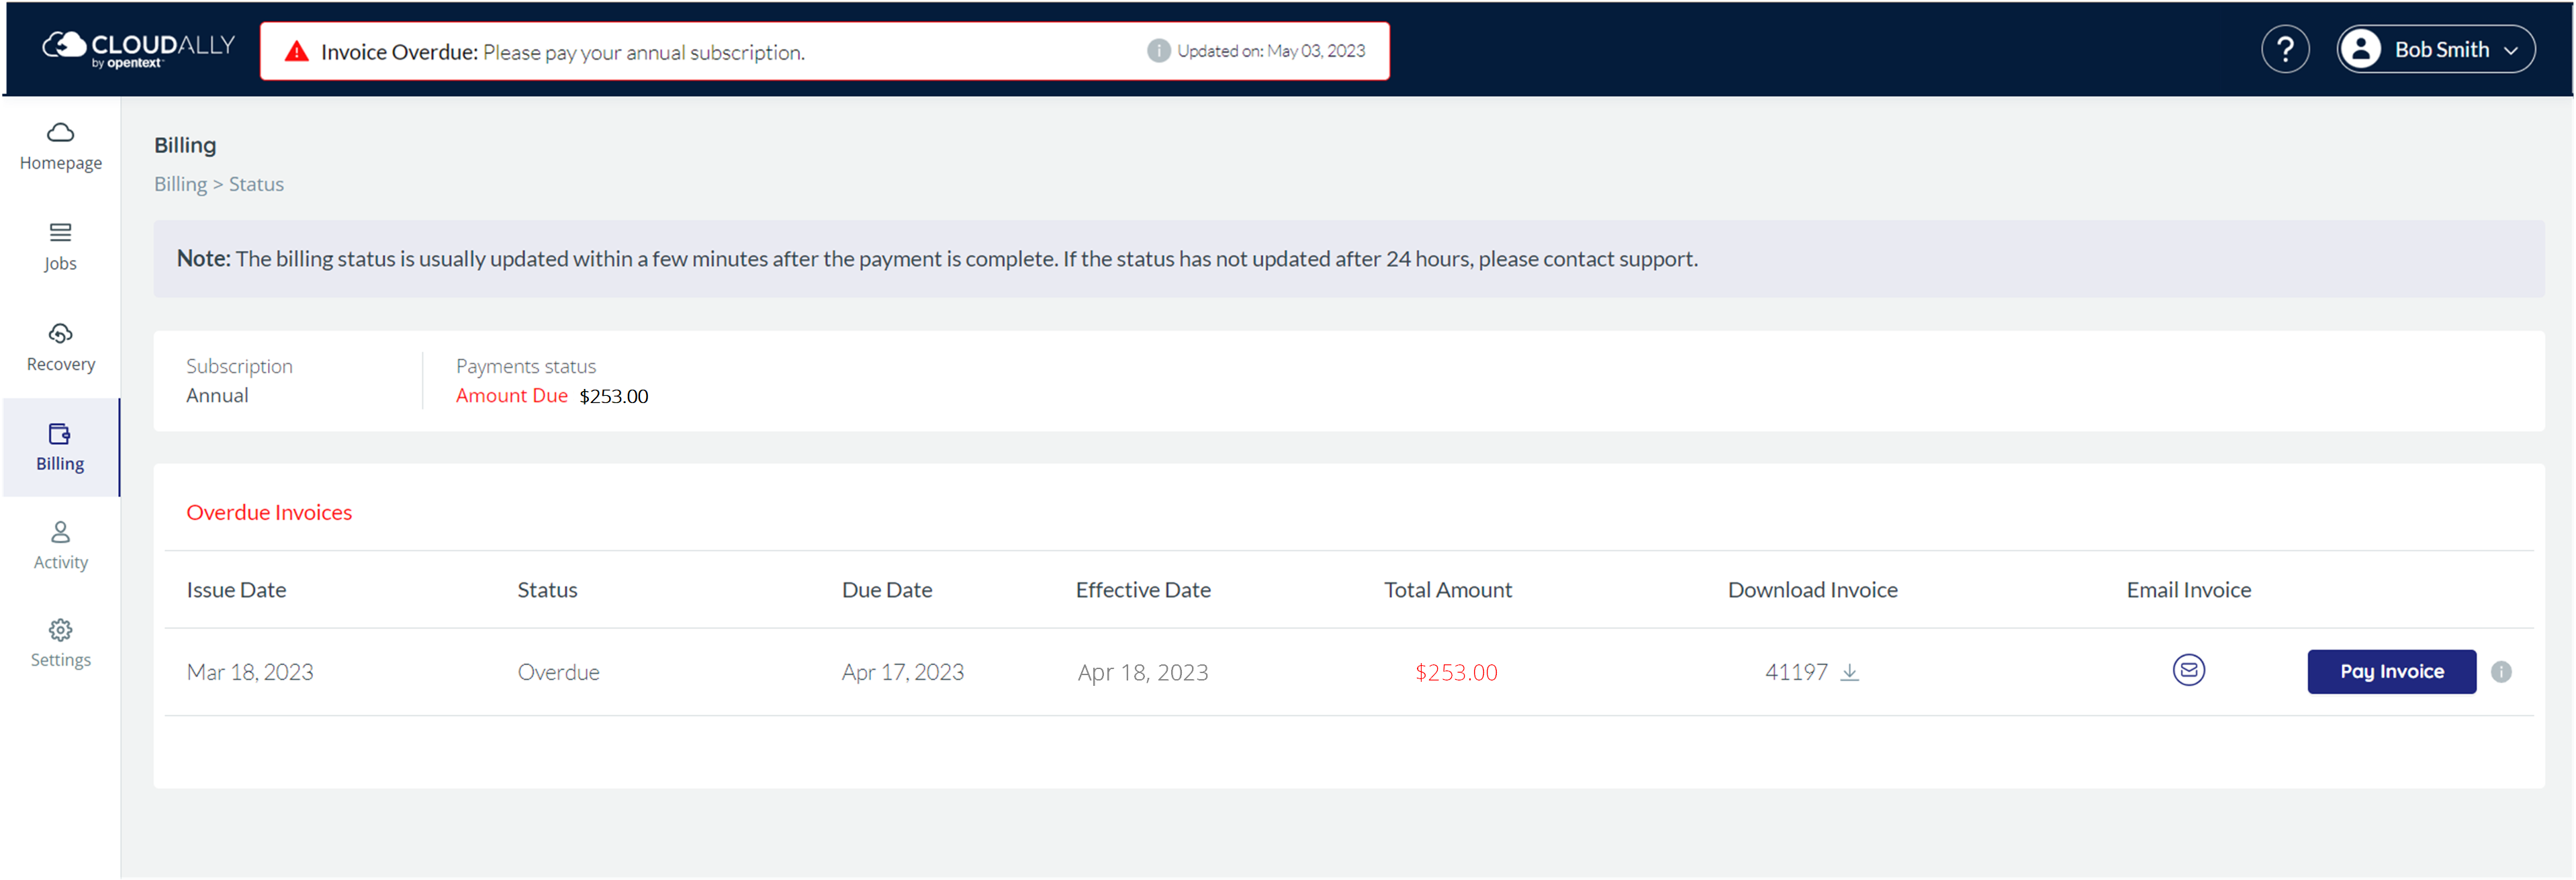 Billing status page with Invoice Overdue message